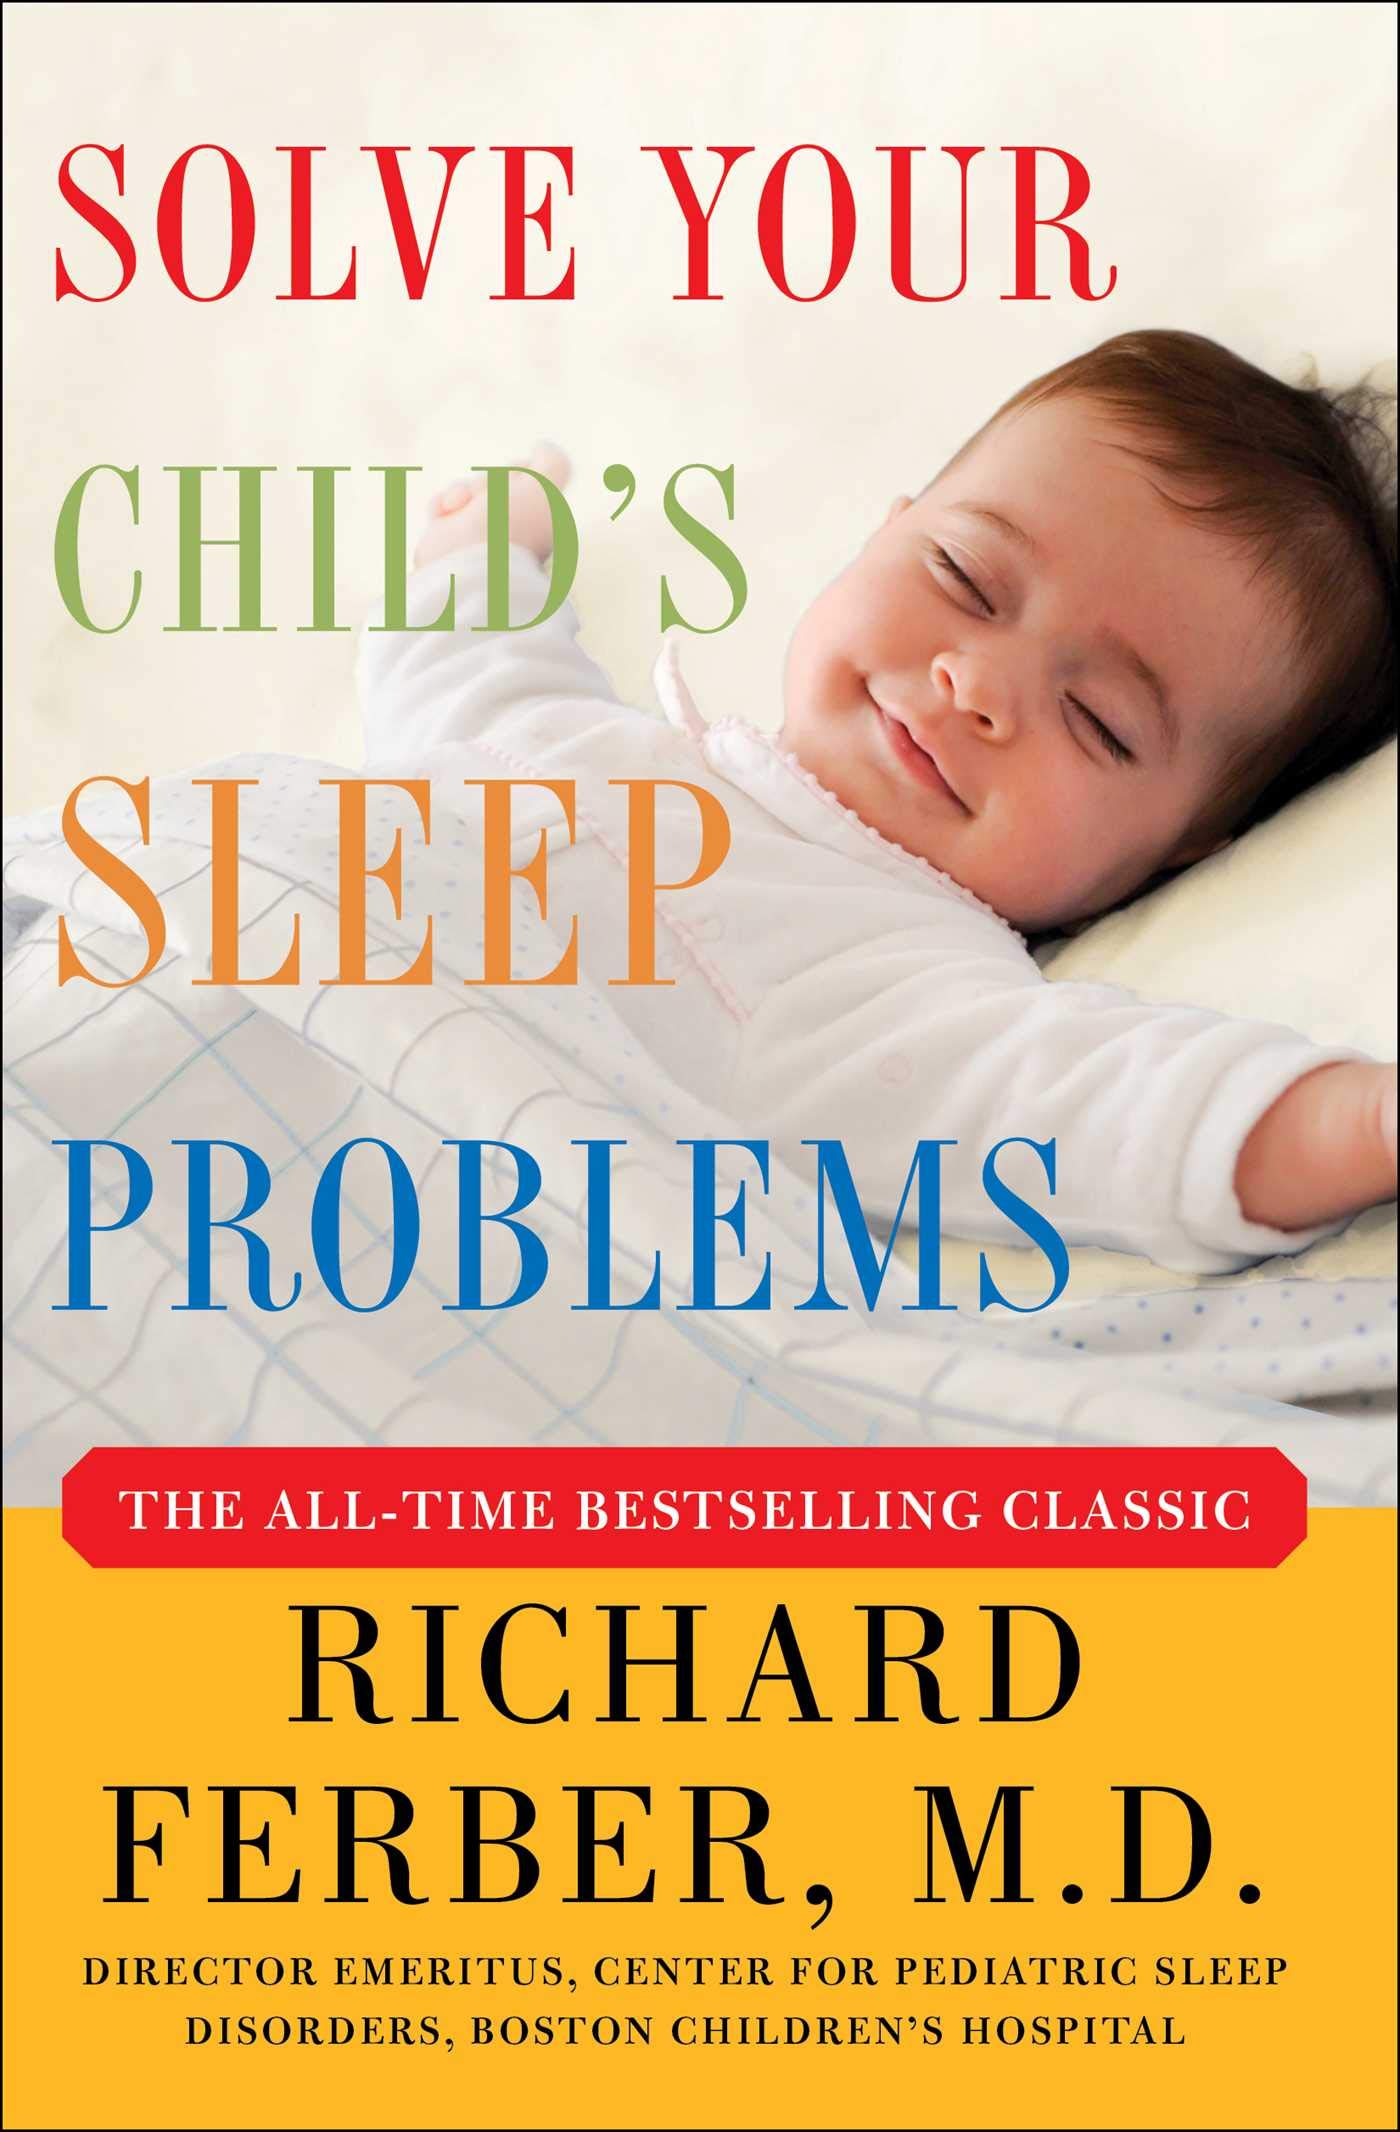 Top 17 Best Sleep Training Books for Babies Reviews in 2022 6